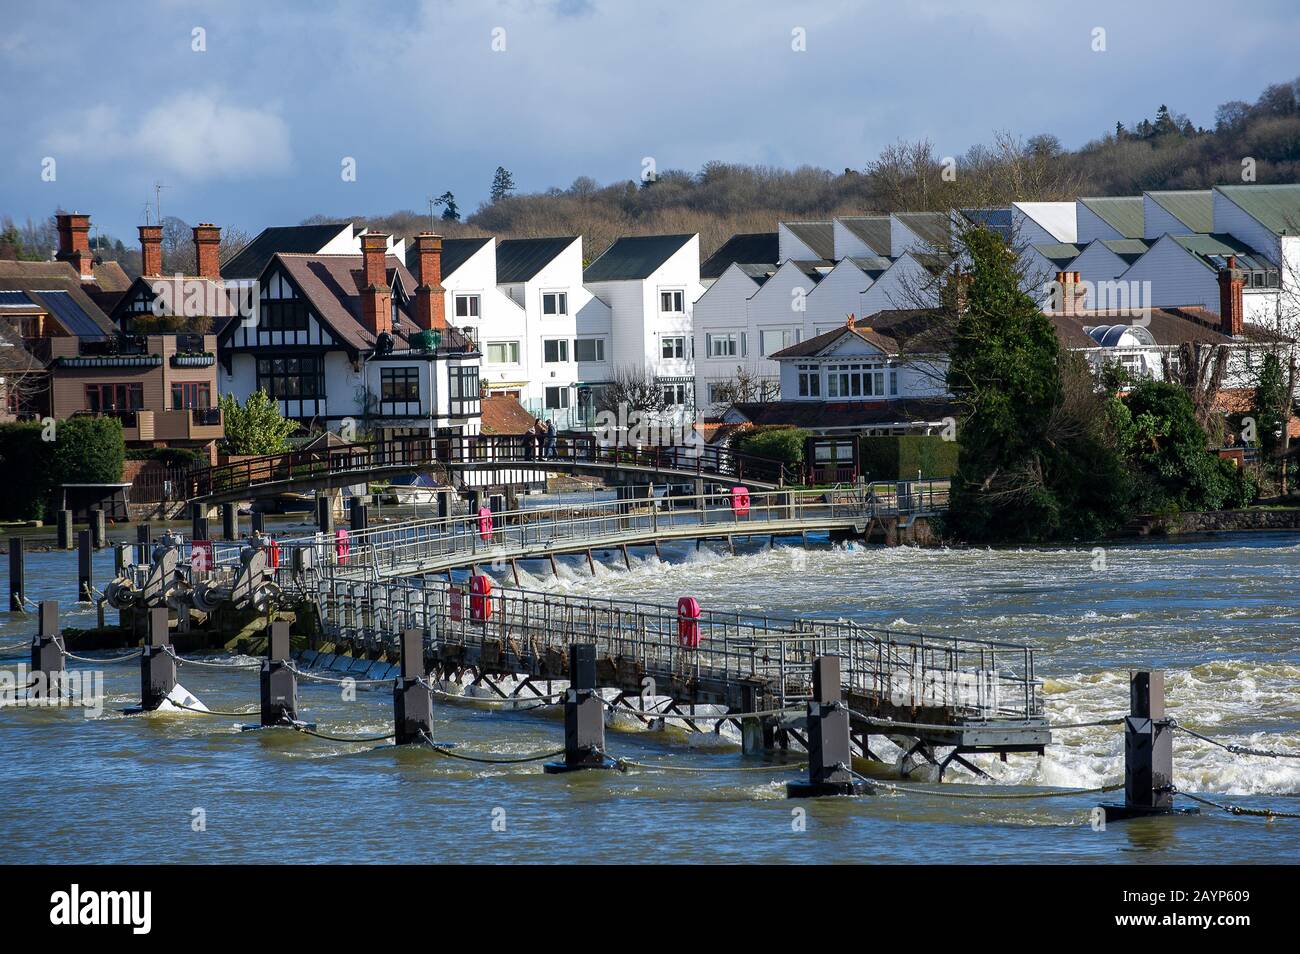 Flooding, Marlow, Buckinghamshire, UK. 15th February, 2014. Following sustained rainfall the River Thames at Marlow burst it's bank and flooded parts of the town. The water levels were higher than normal at Marlow Lock. Credit: Maureen McLean/Alamy Stock Photo